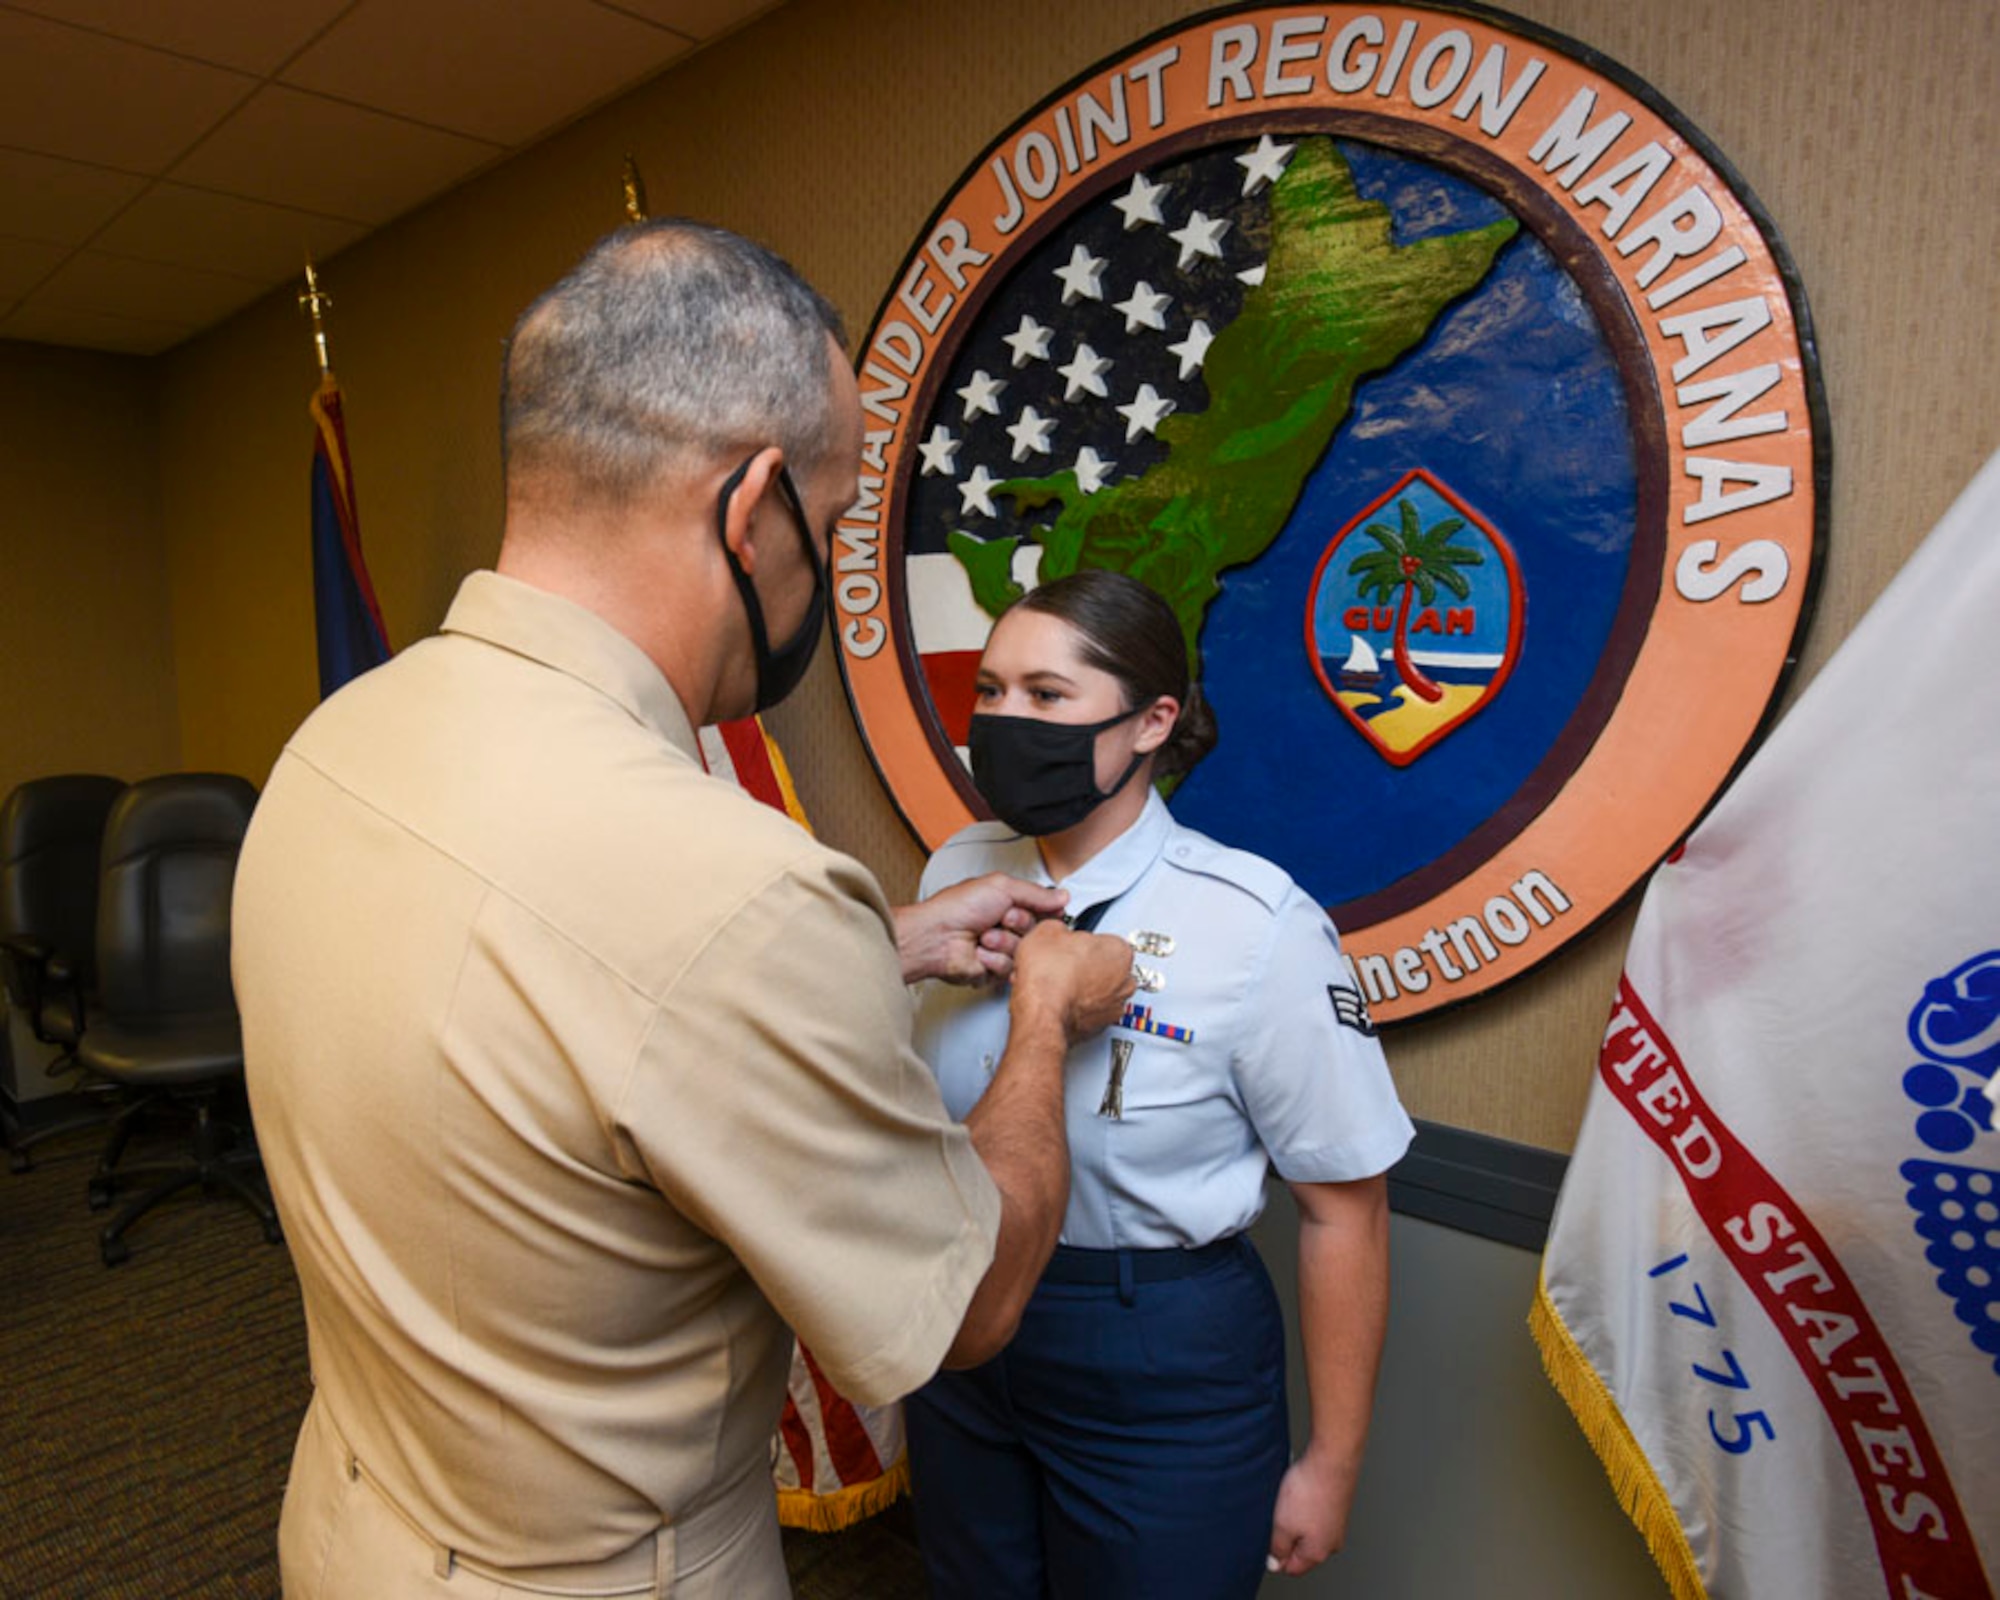 Senior Airman Ell-ie Vonkahle, a precision guided munitions crew chief assigned to the 36th Munitions Squadron, wins the 2019 Joint Region Marianas Junior Service Member of the Year Award on September 25, 2020. The award was personally presented by Rear Admr. John Menoni as a tribute to Vonkahle’s outstanding work in the military as well as in the Guam community.